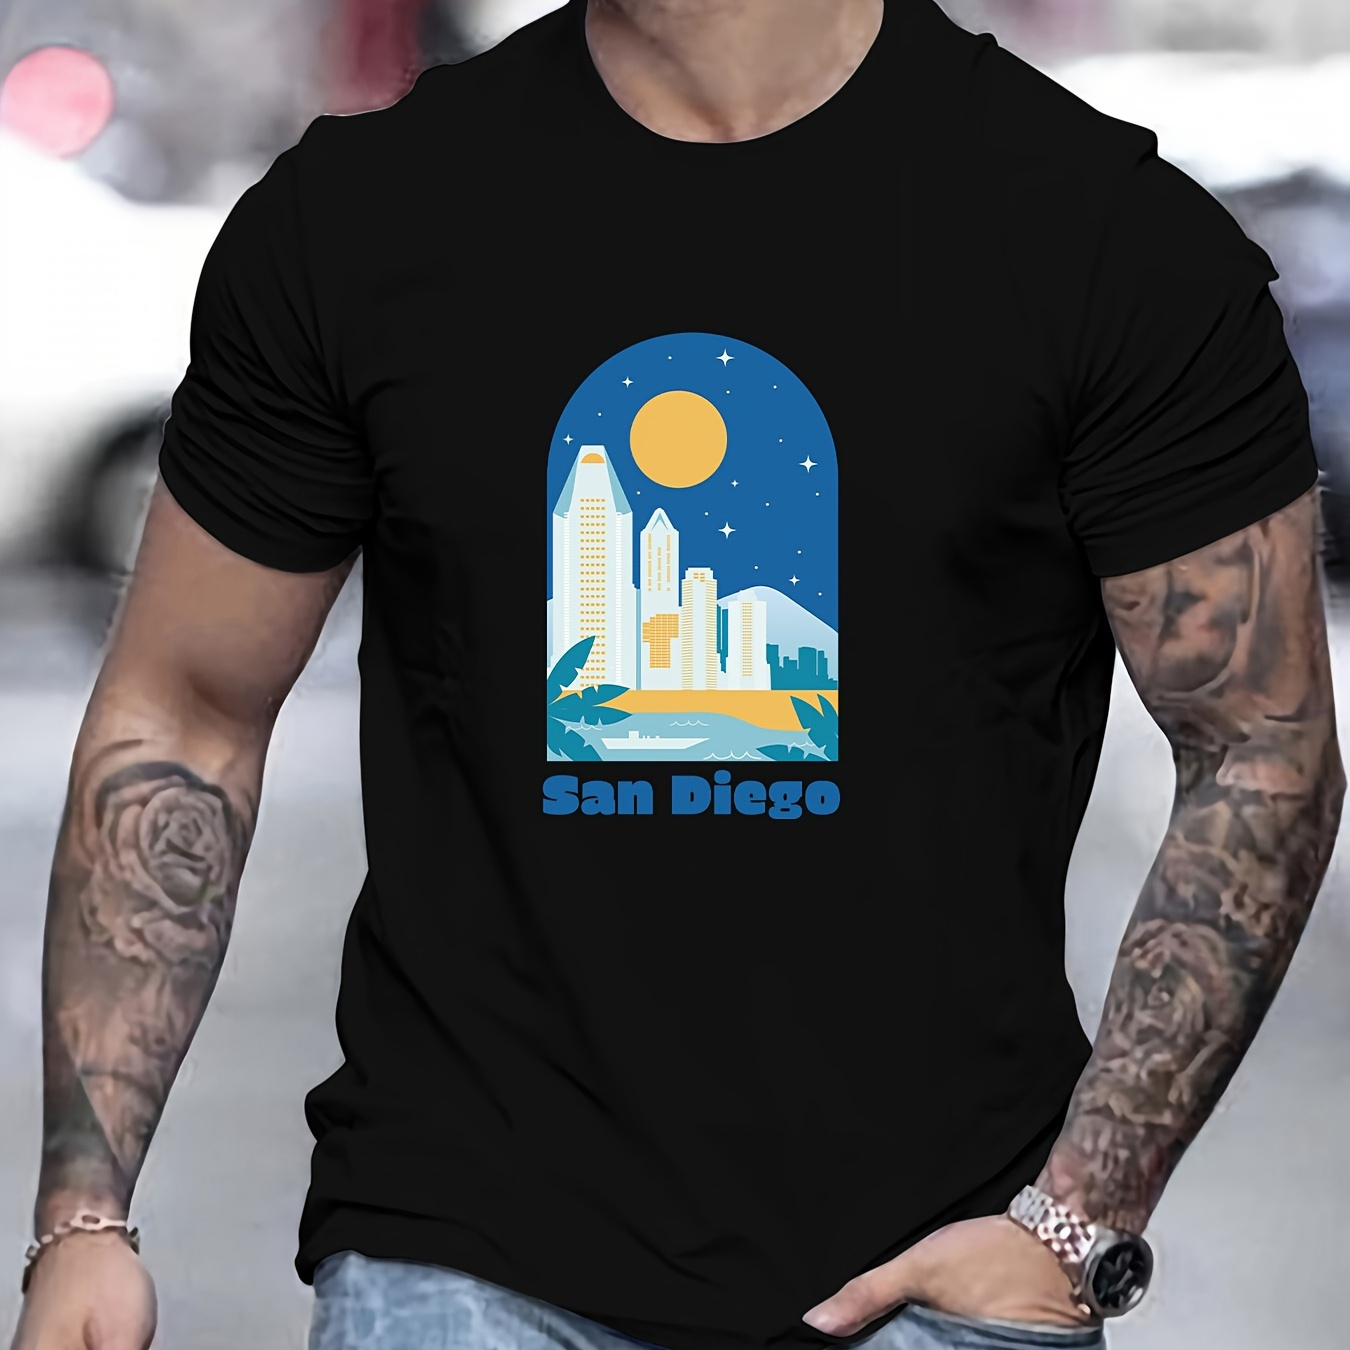 

San Diego Print T Shirt, Tees For Men, Casual Short Sleeve T-shirt For Summer